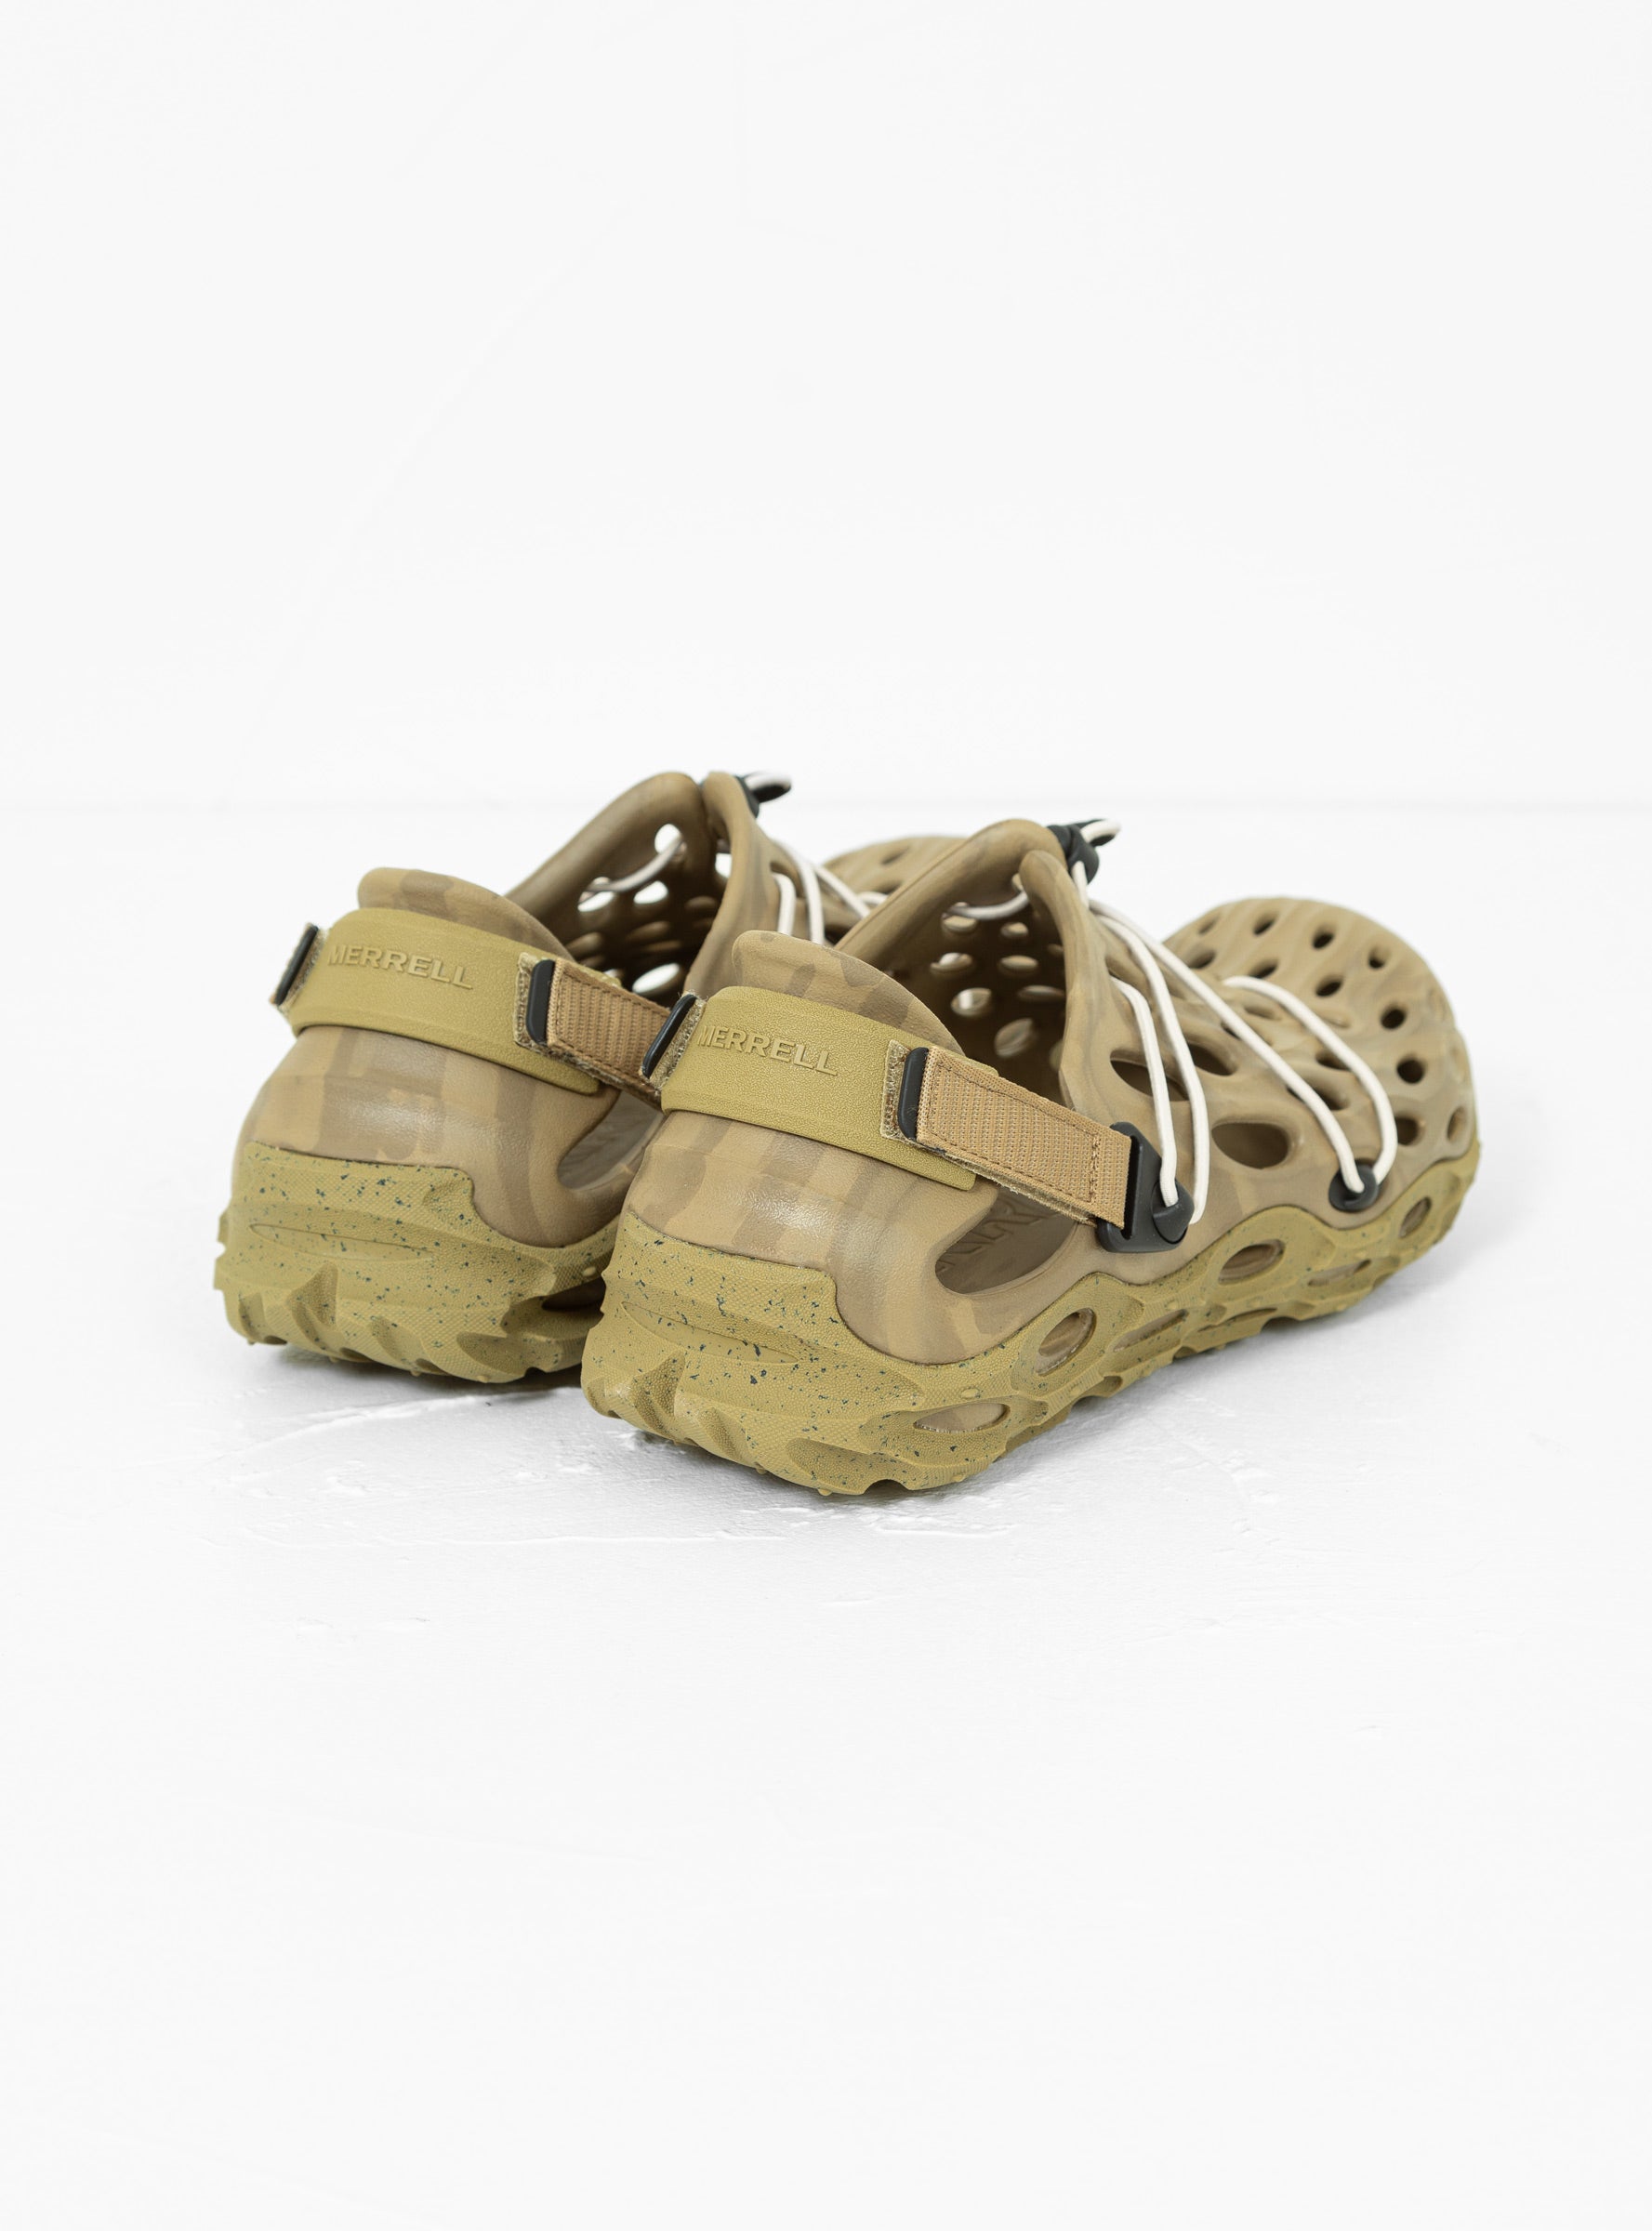 Hydro Moc AT Cage 1TRL Water Shoes Coyote Brown by MERRELL 1TRL 